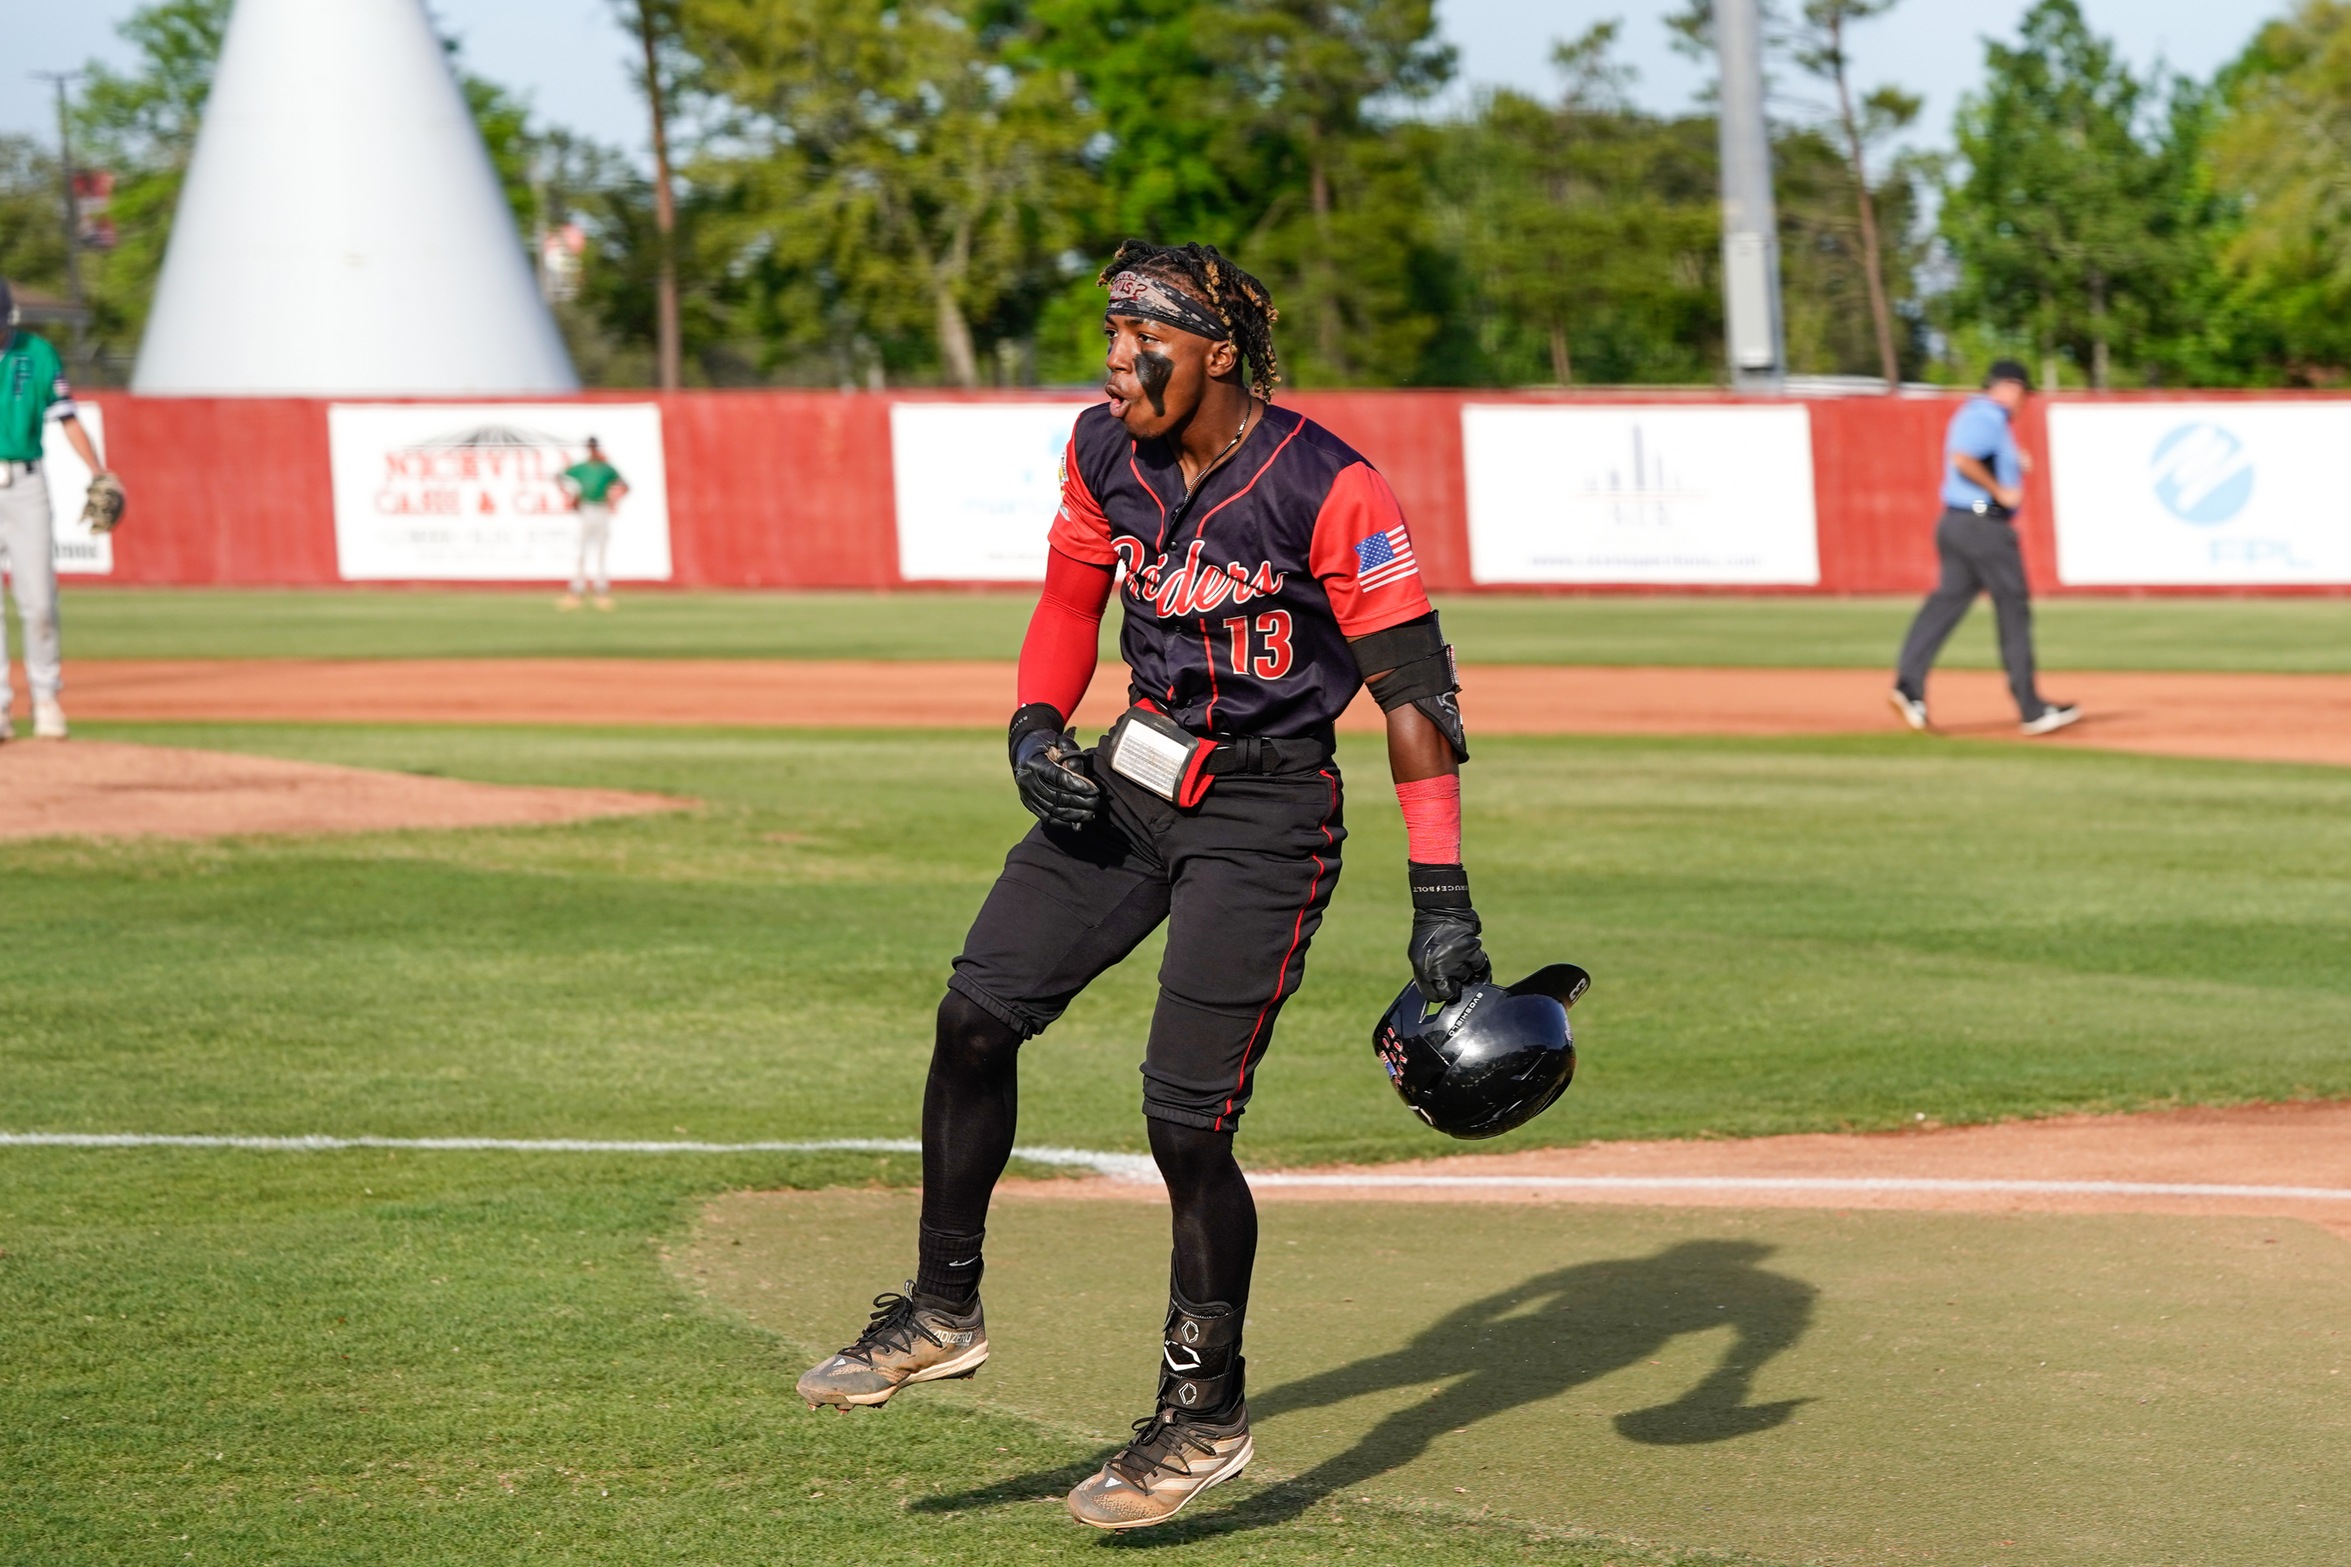 Long Ball Power Raiders to Commanding 10-0 Victory Over  Pensacola On Tuesday